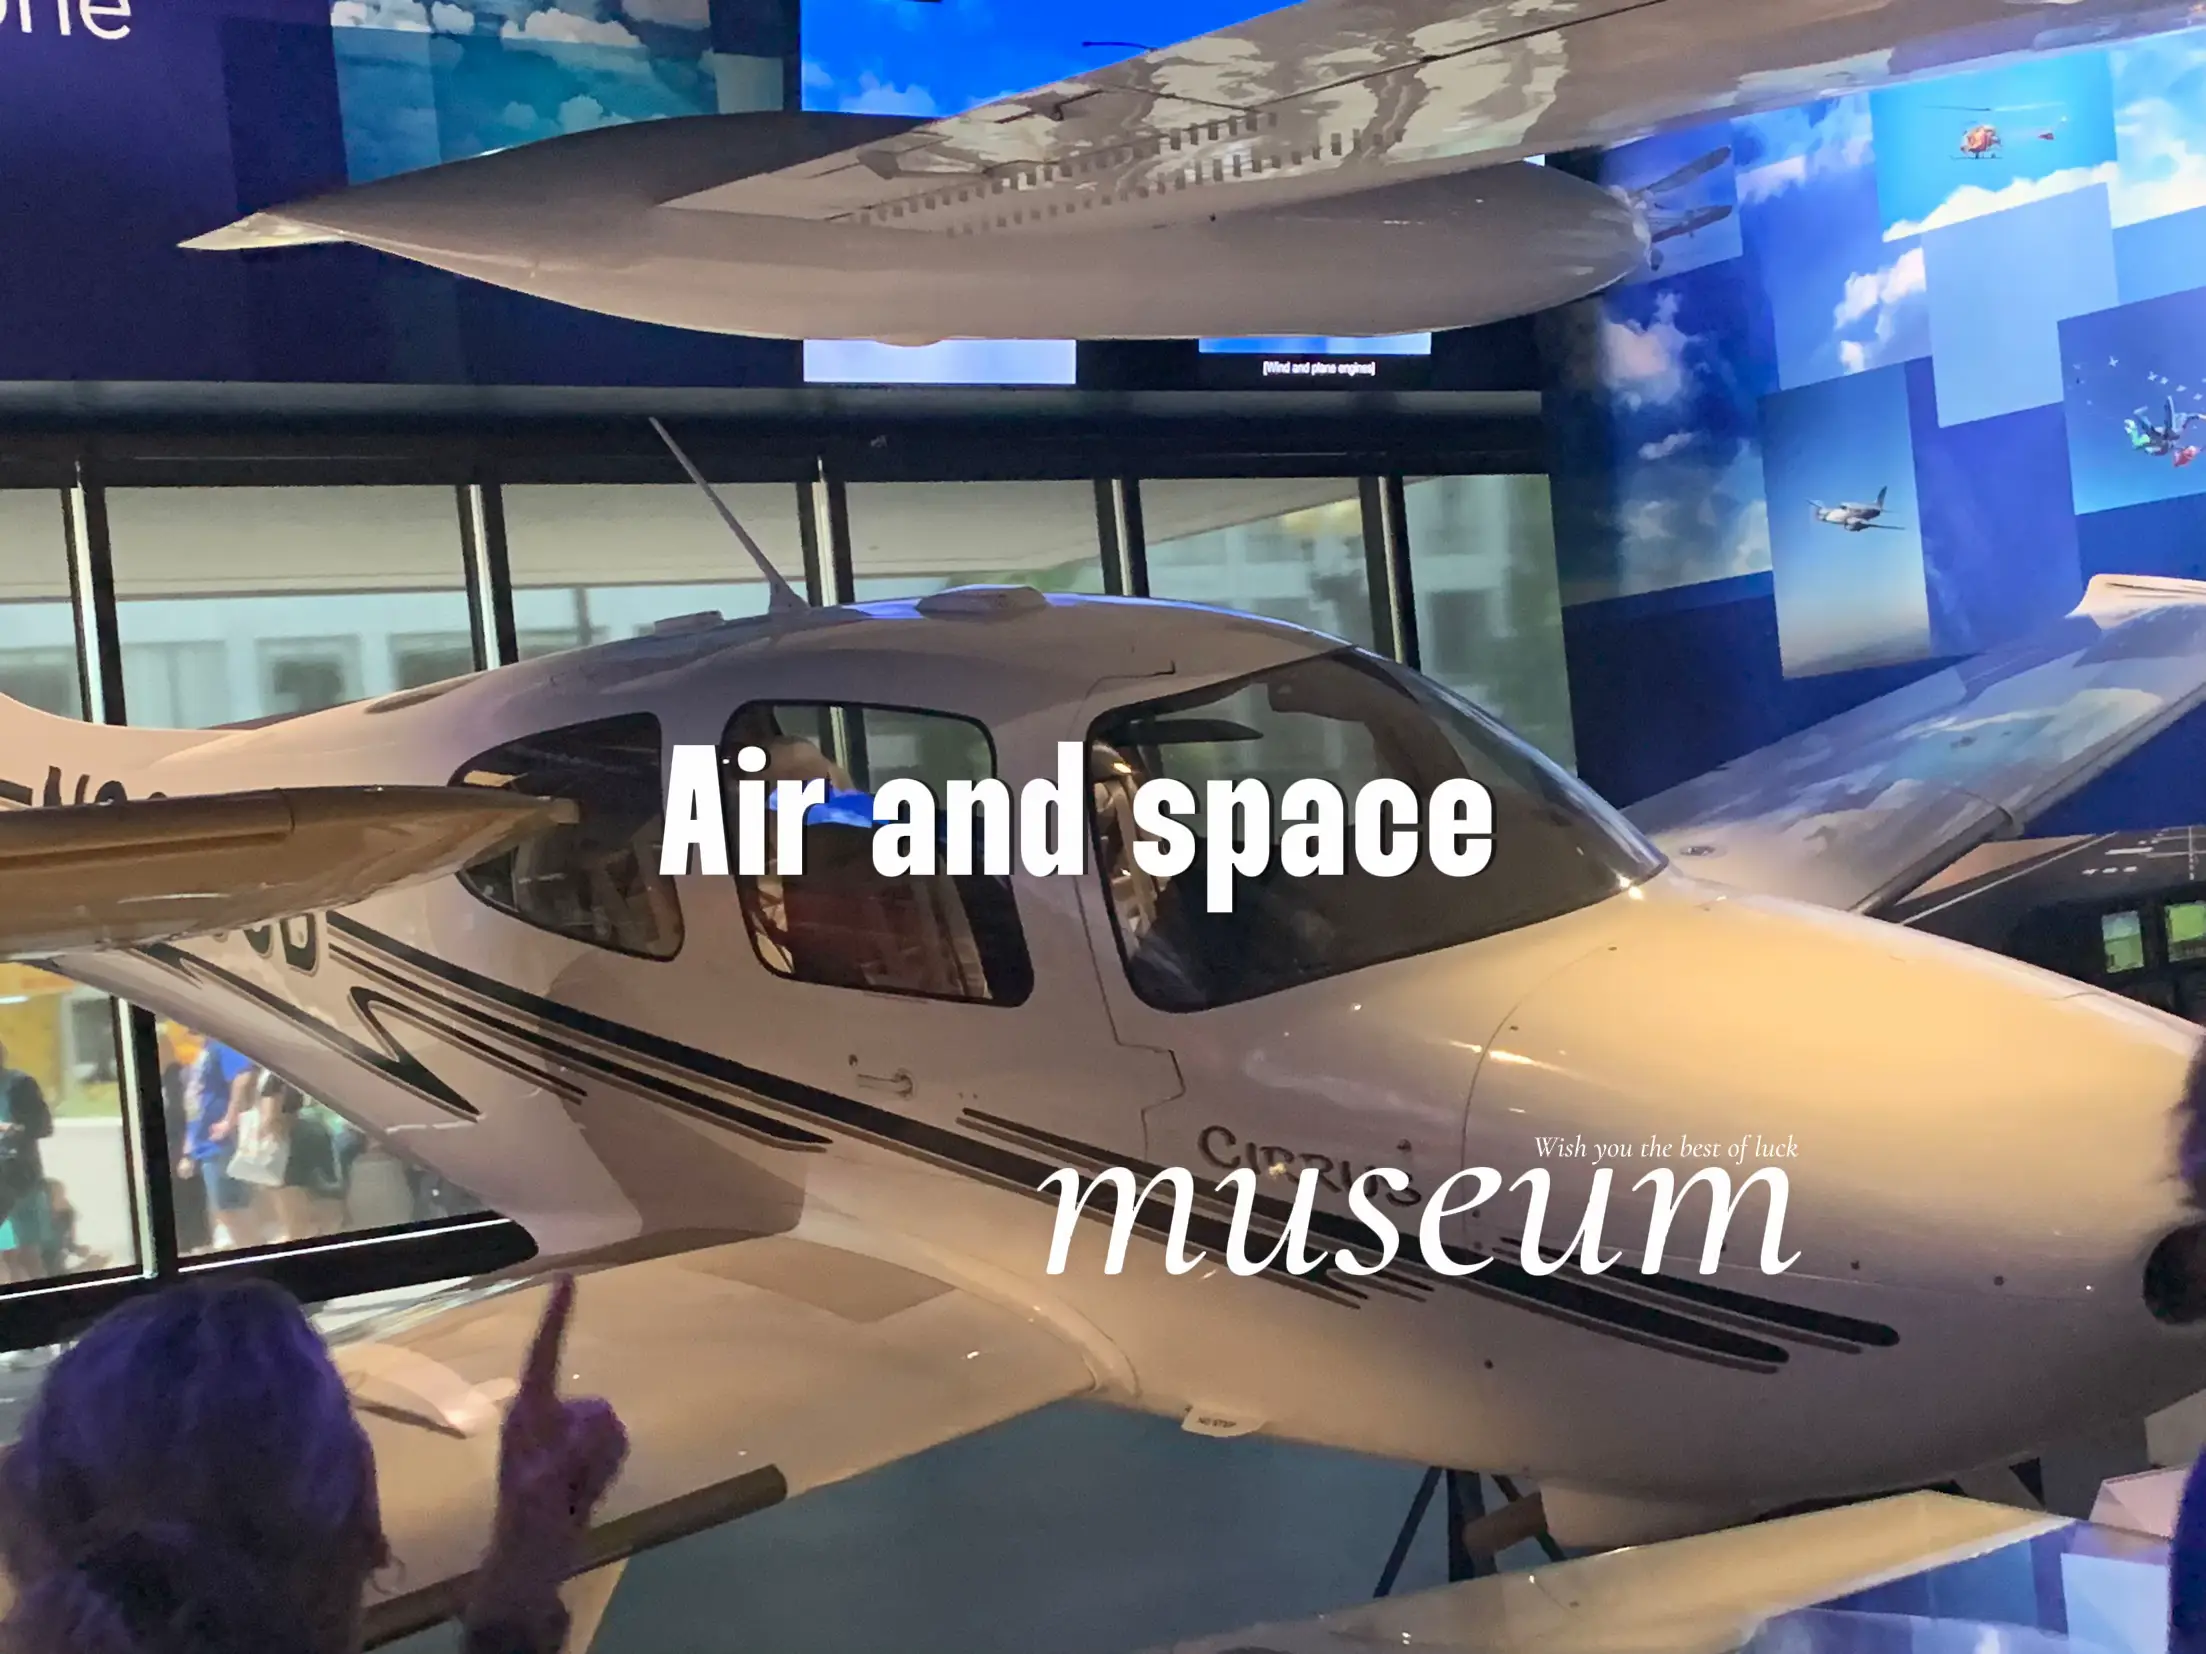  A museum display of a plane.